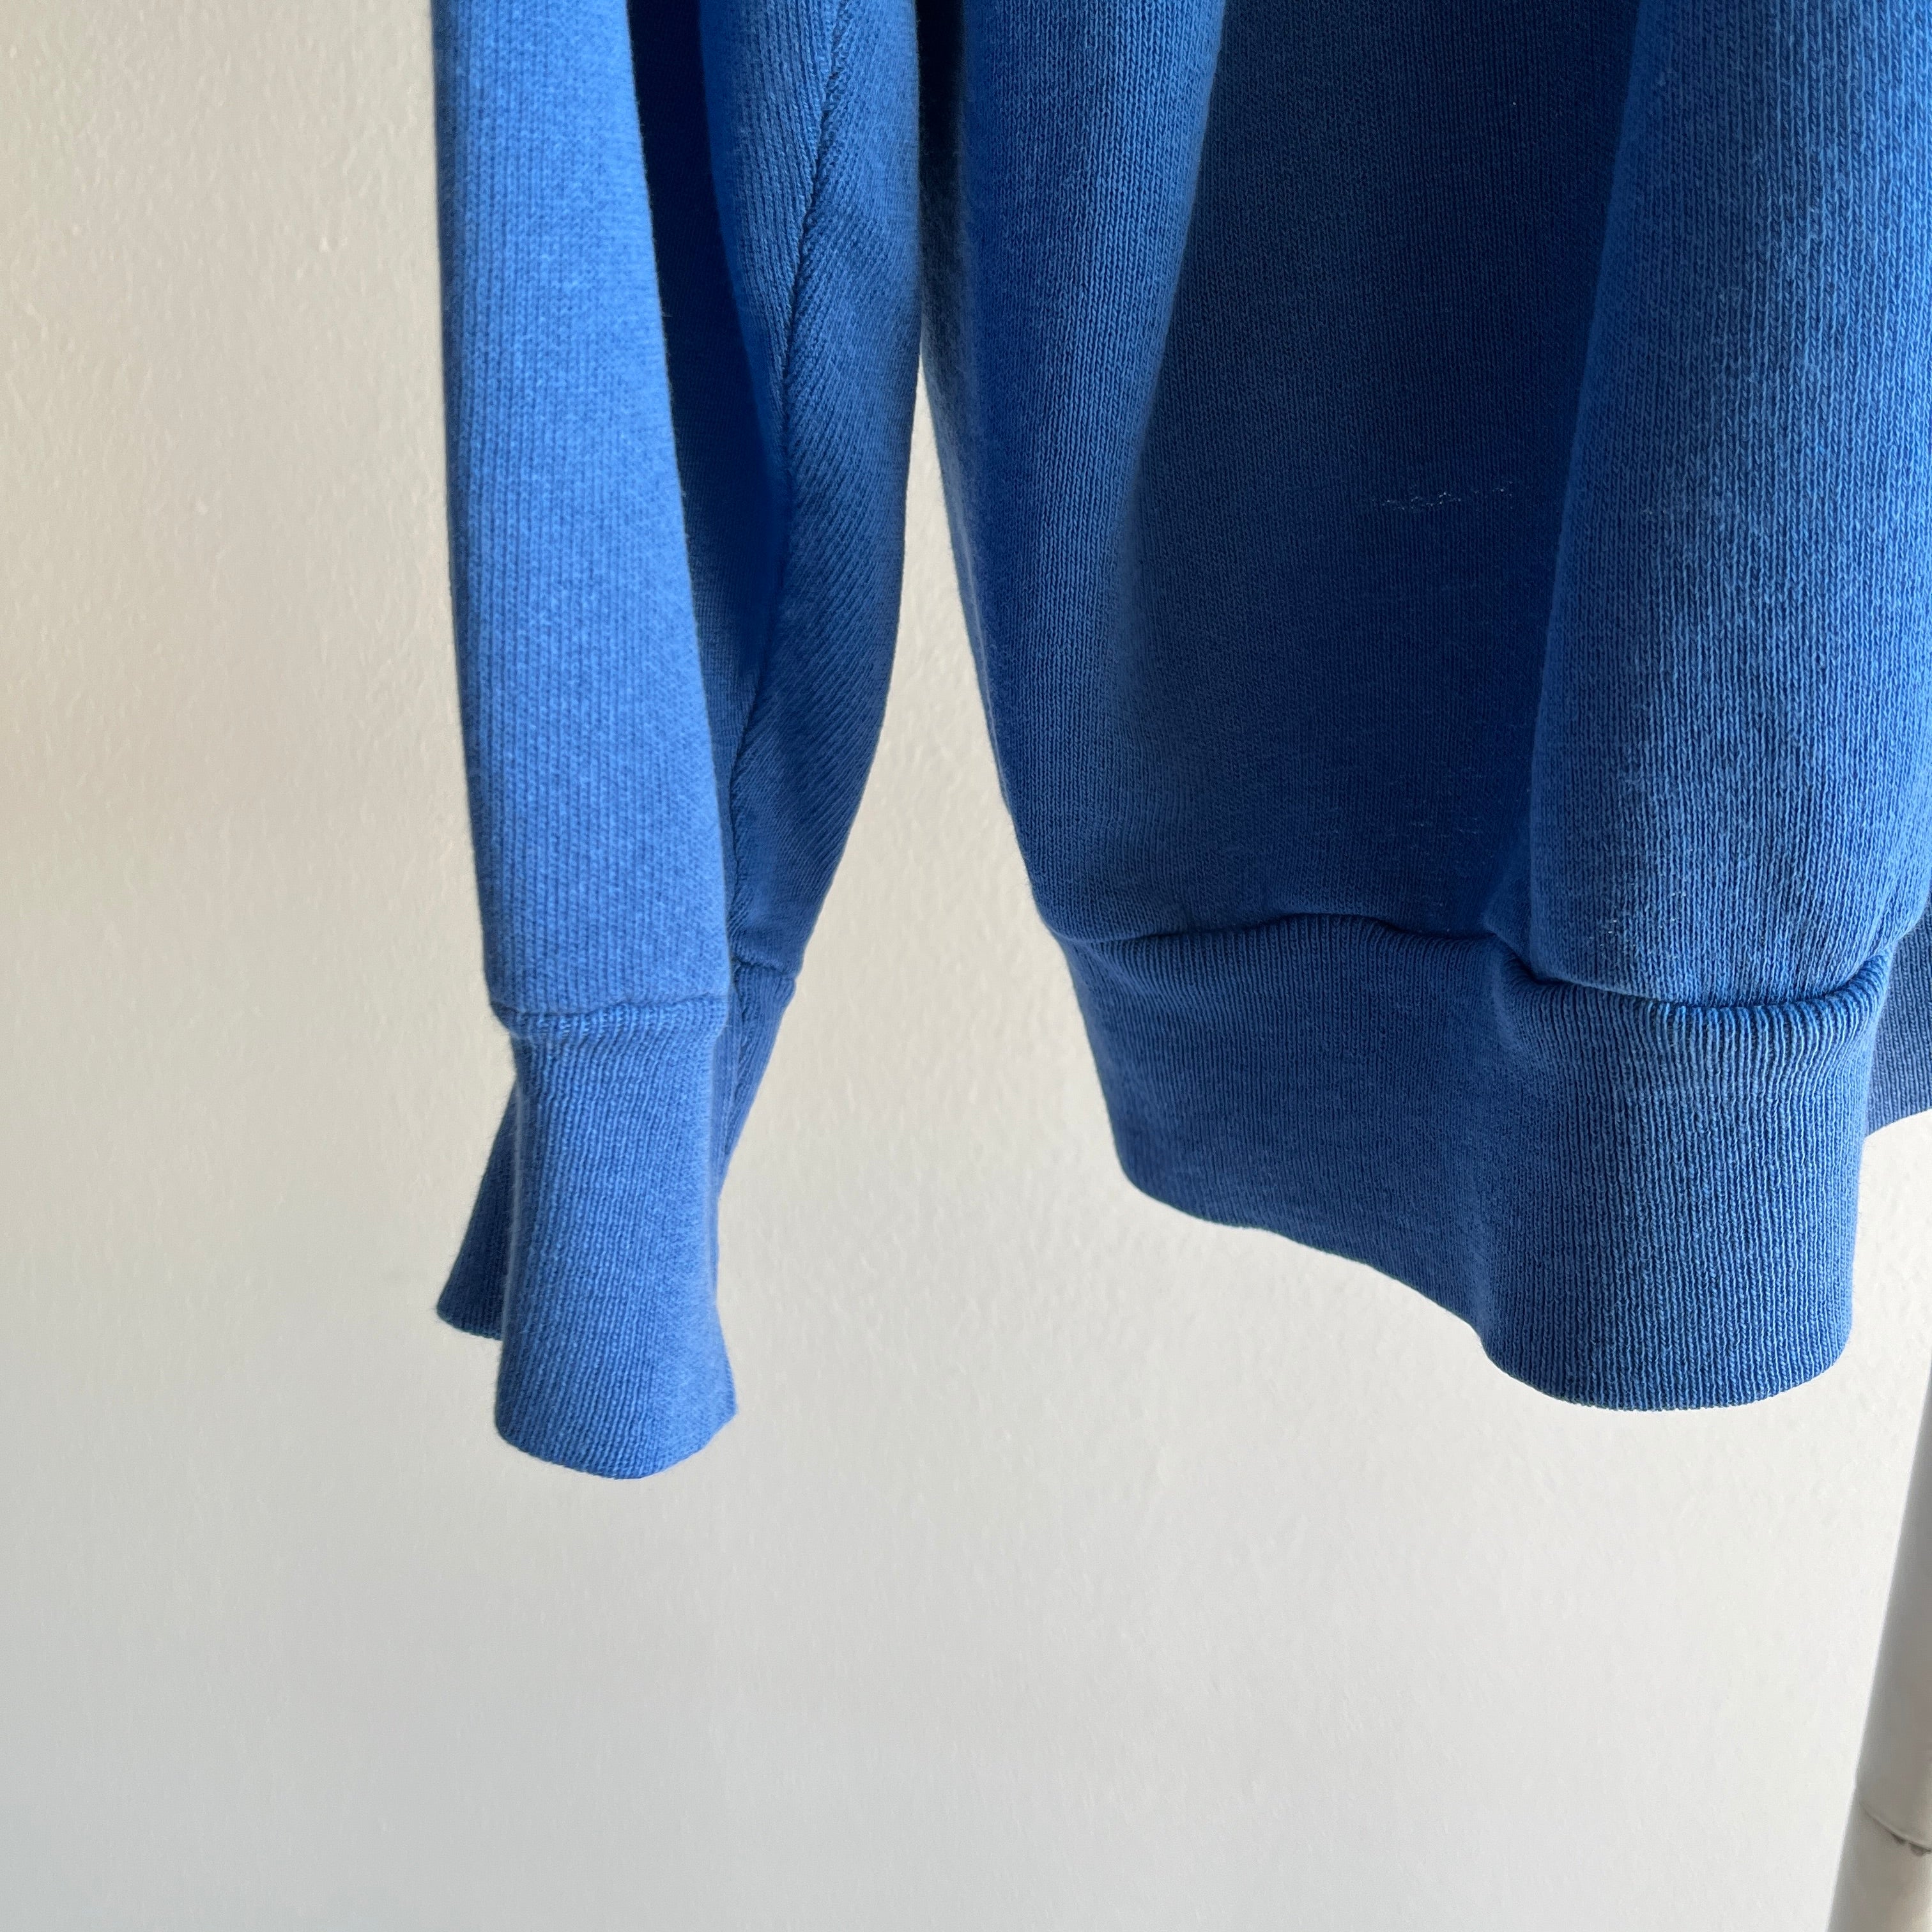 1980s Thinned Out and Slouchy Blue Raglan Sweatshirt